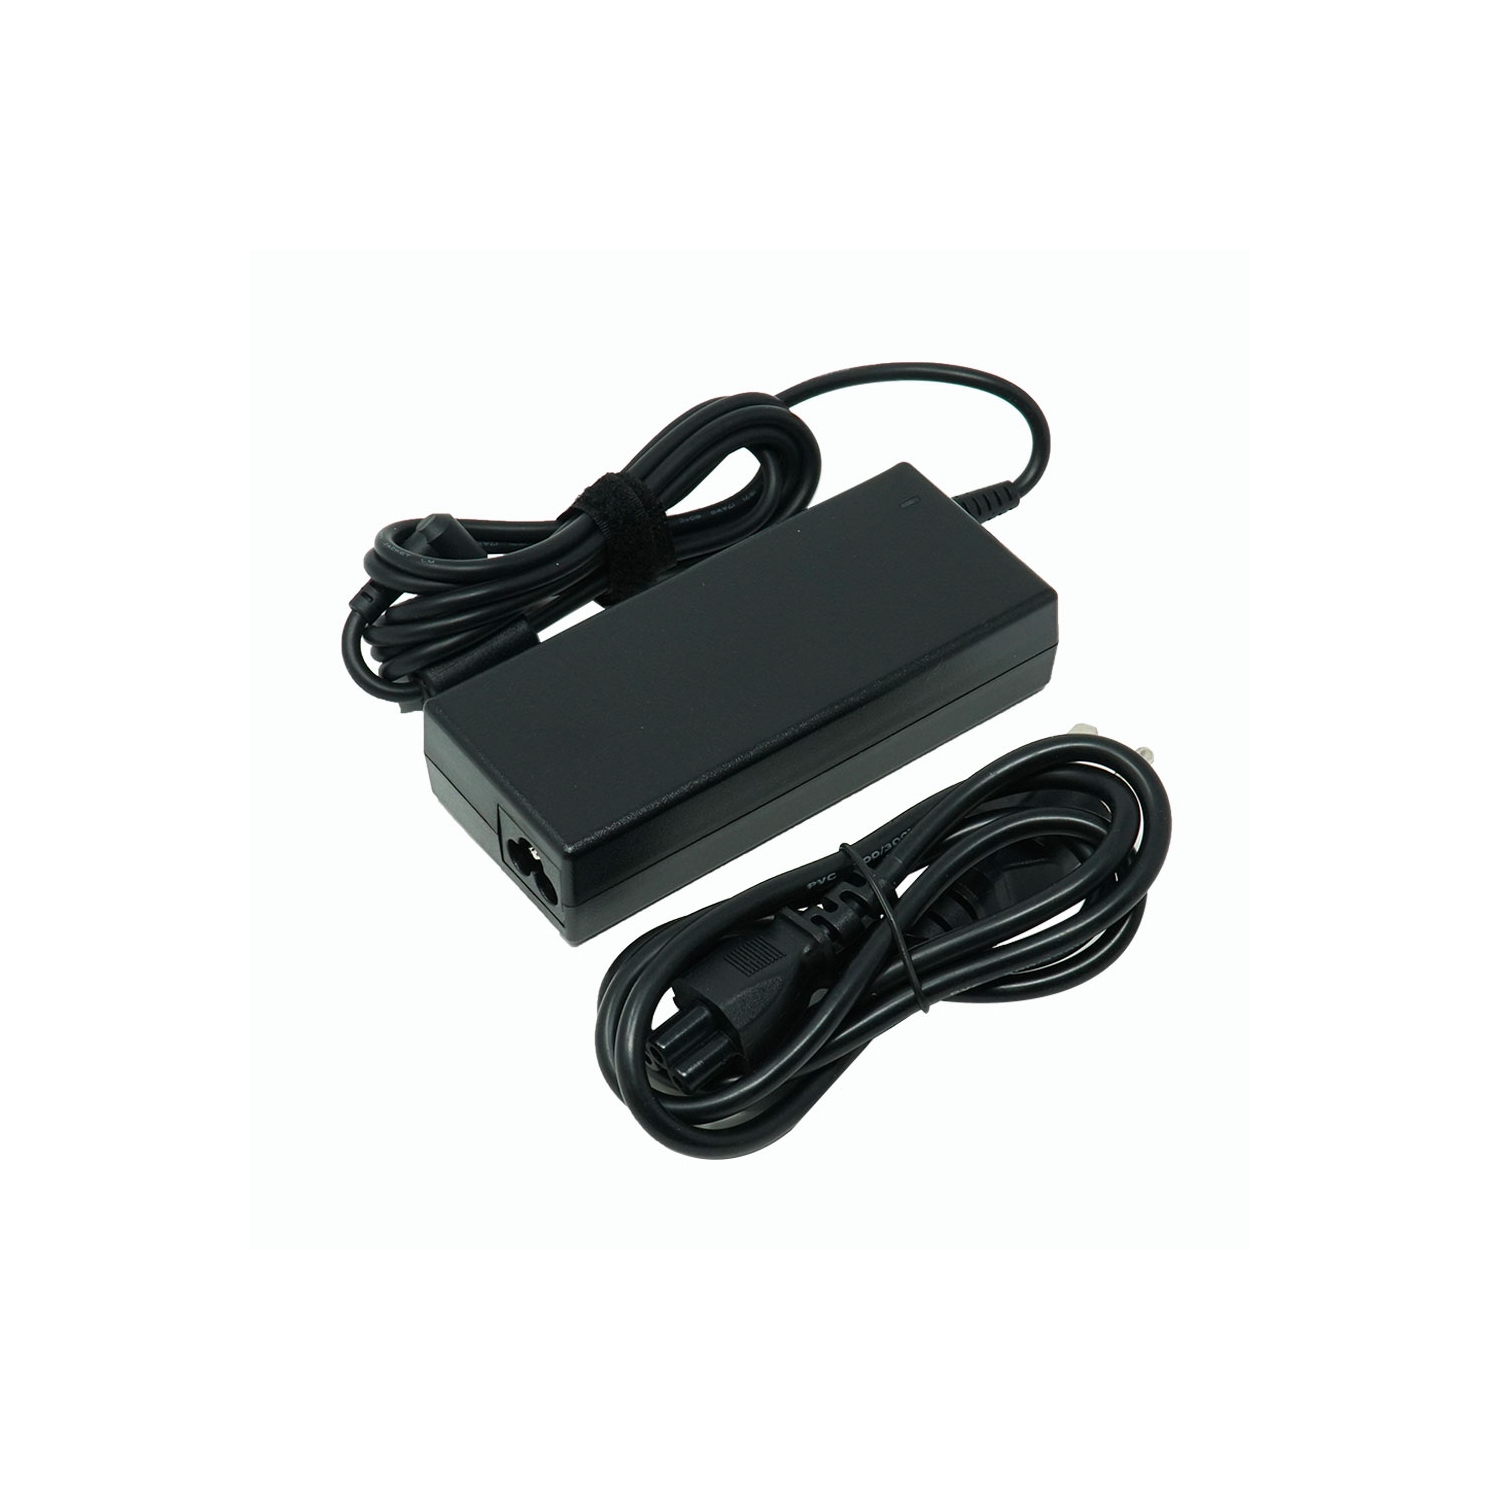 Dr. Battery - Notebook Adapter for Fujitsu LifeBook AH531 / S761 / 90-N00PW5300T / 90-N00PW5500T - Free Shipping